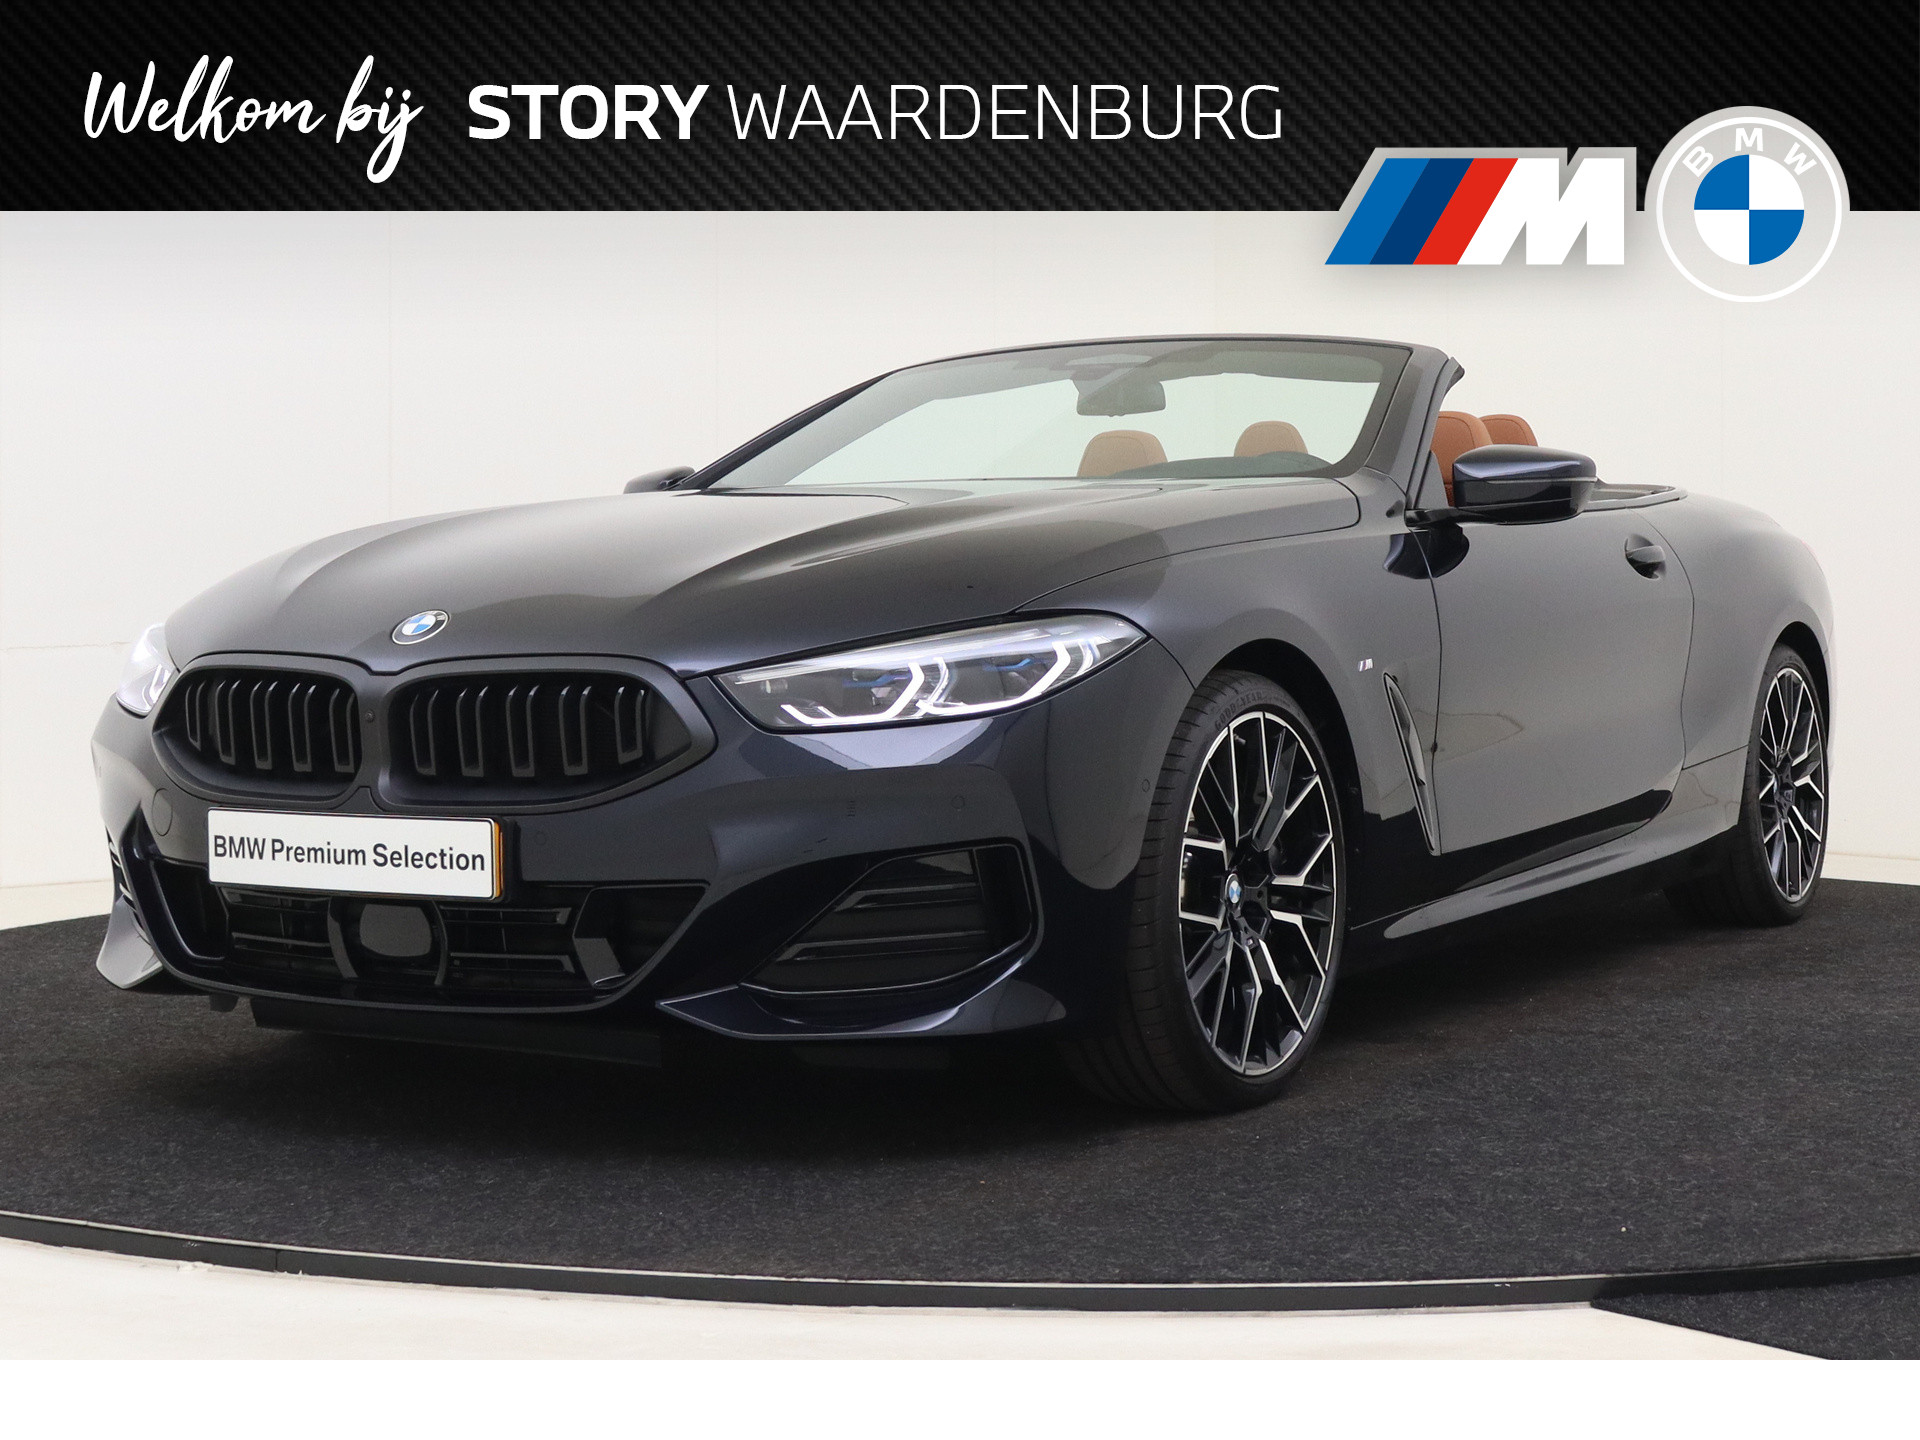 BMW 8 Serie 840i High Executive M Sport Automaat / Laserlight / Air Collar / Bowers & Wilkins / Active Steering / Parking Assistant Plus / Stoelventilatie / Soft-Close